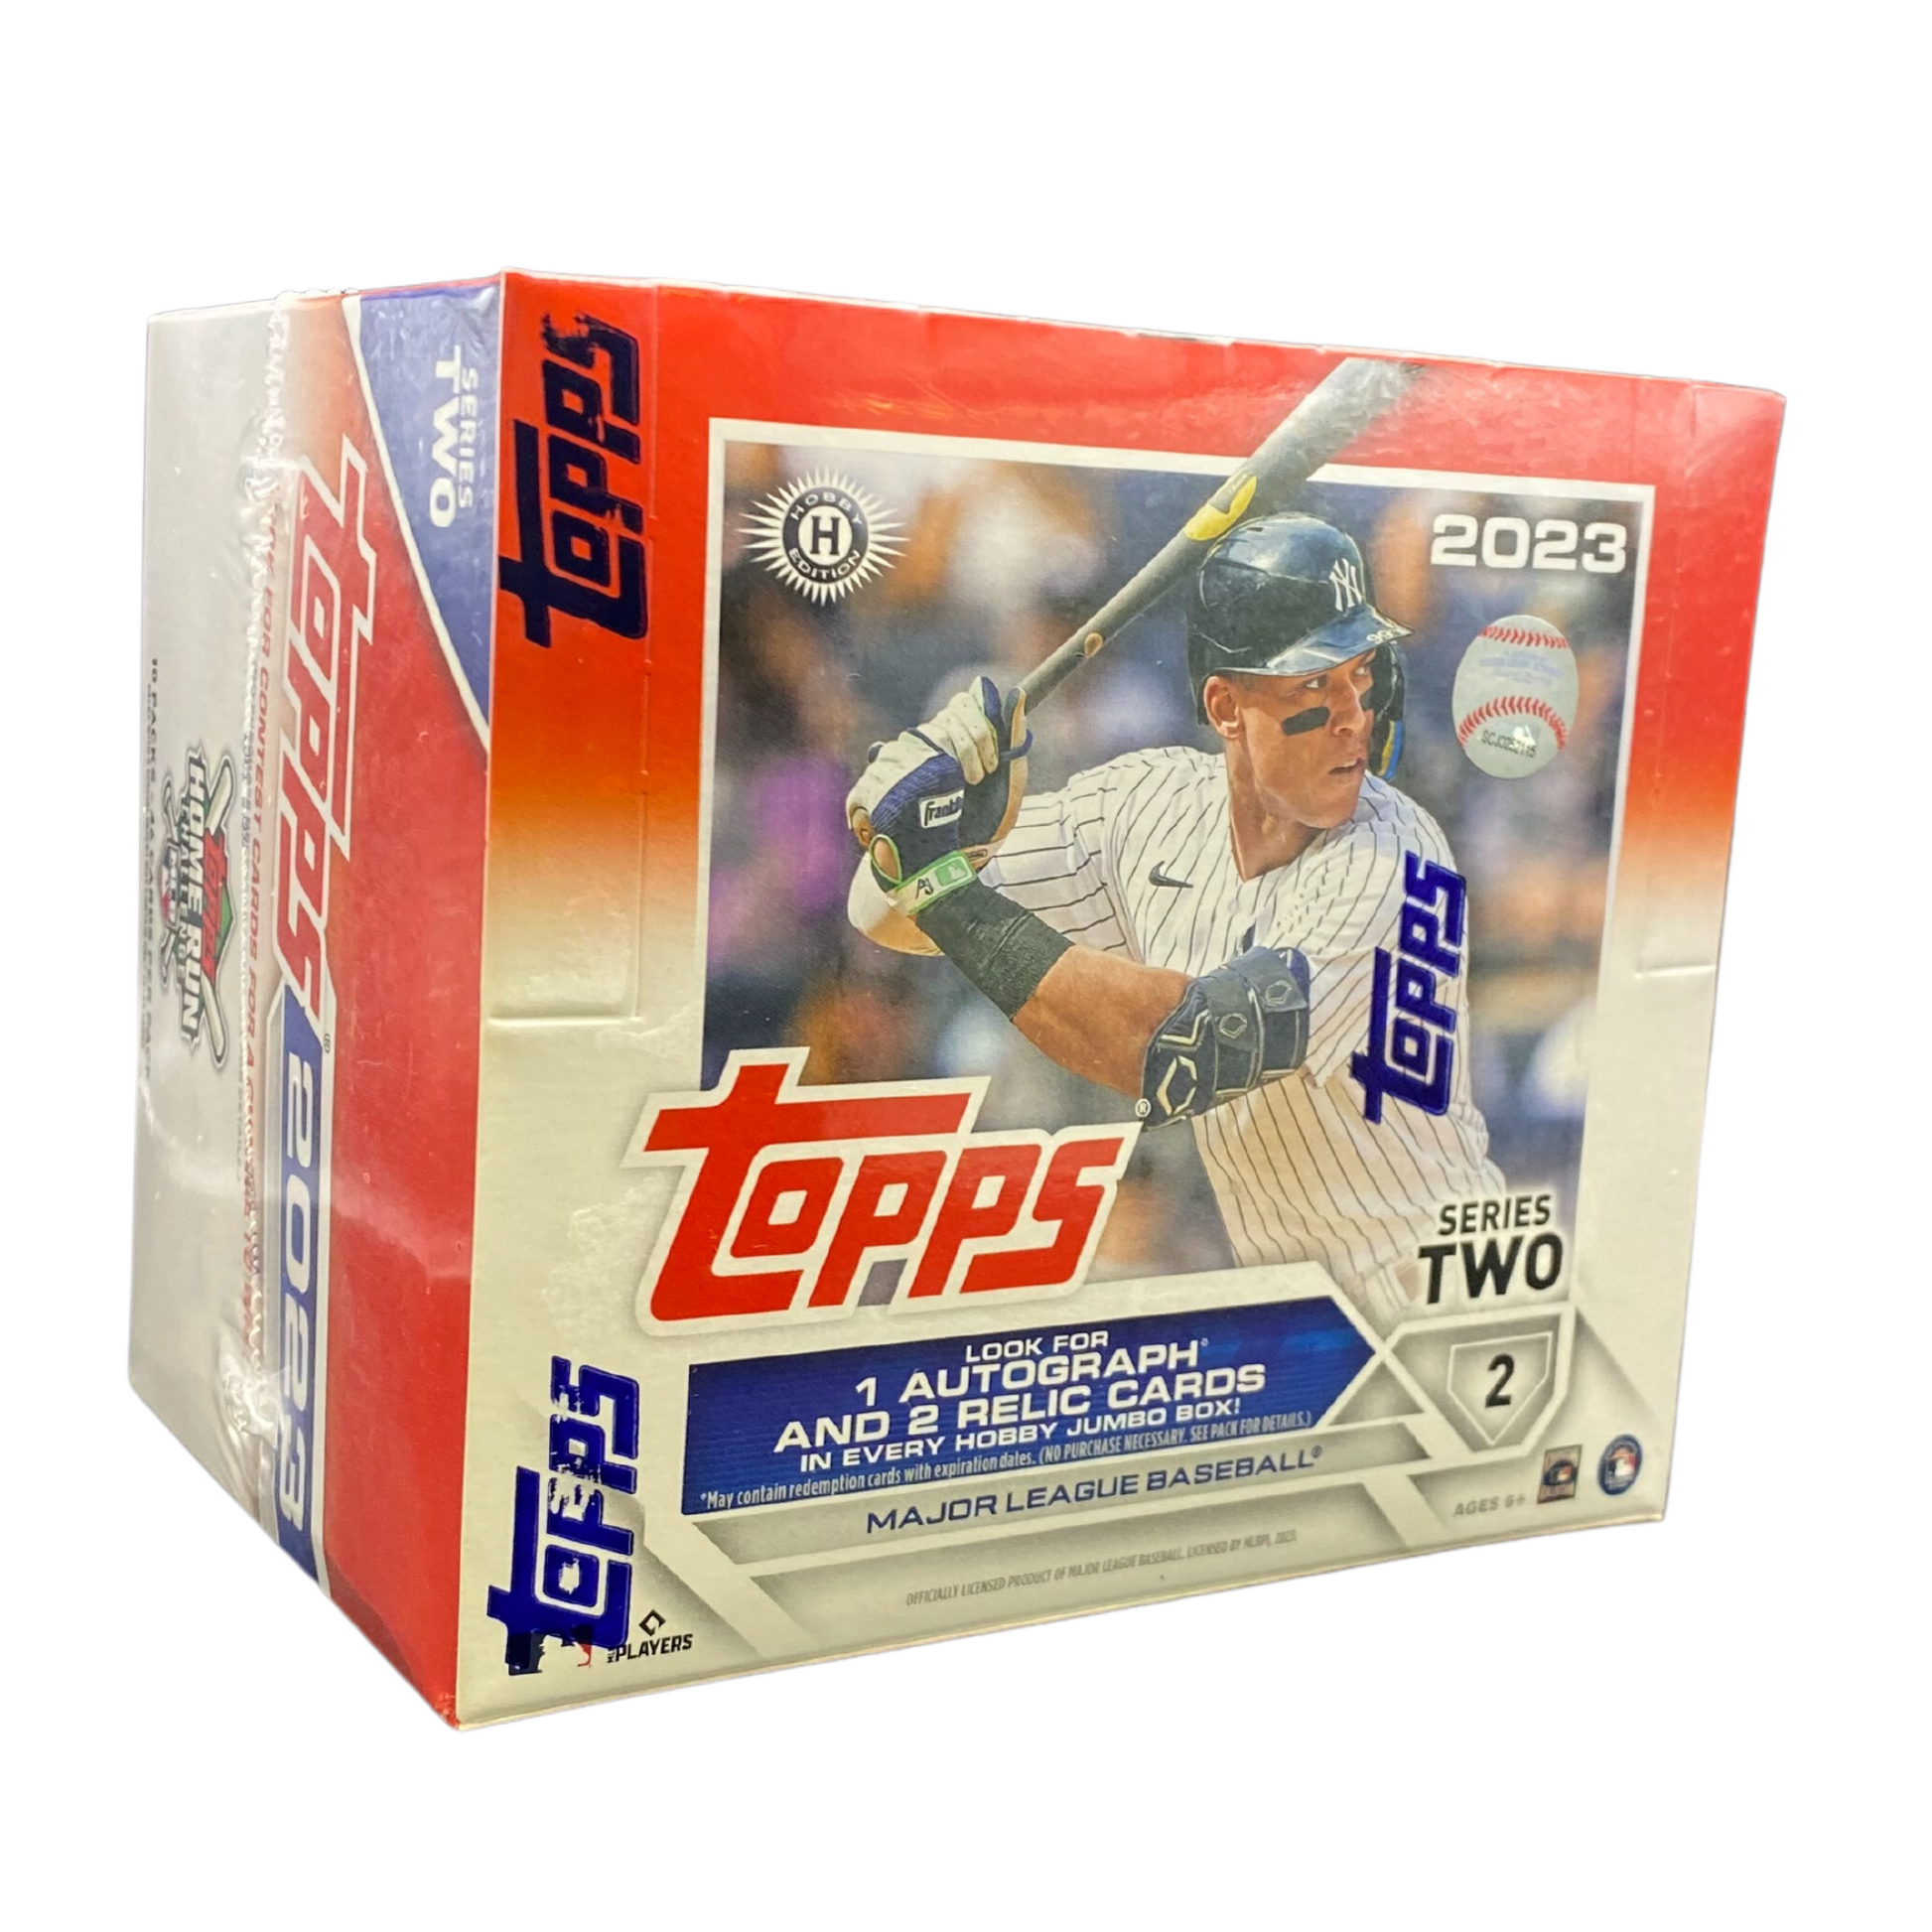 Chicago White Sox 2023 Topps Factory Sealed 17 Card Team Set with Davi